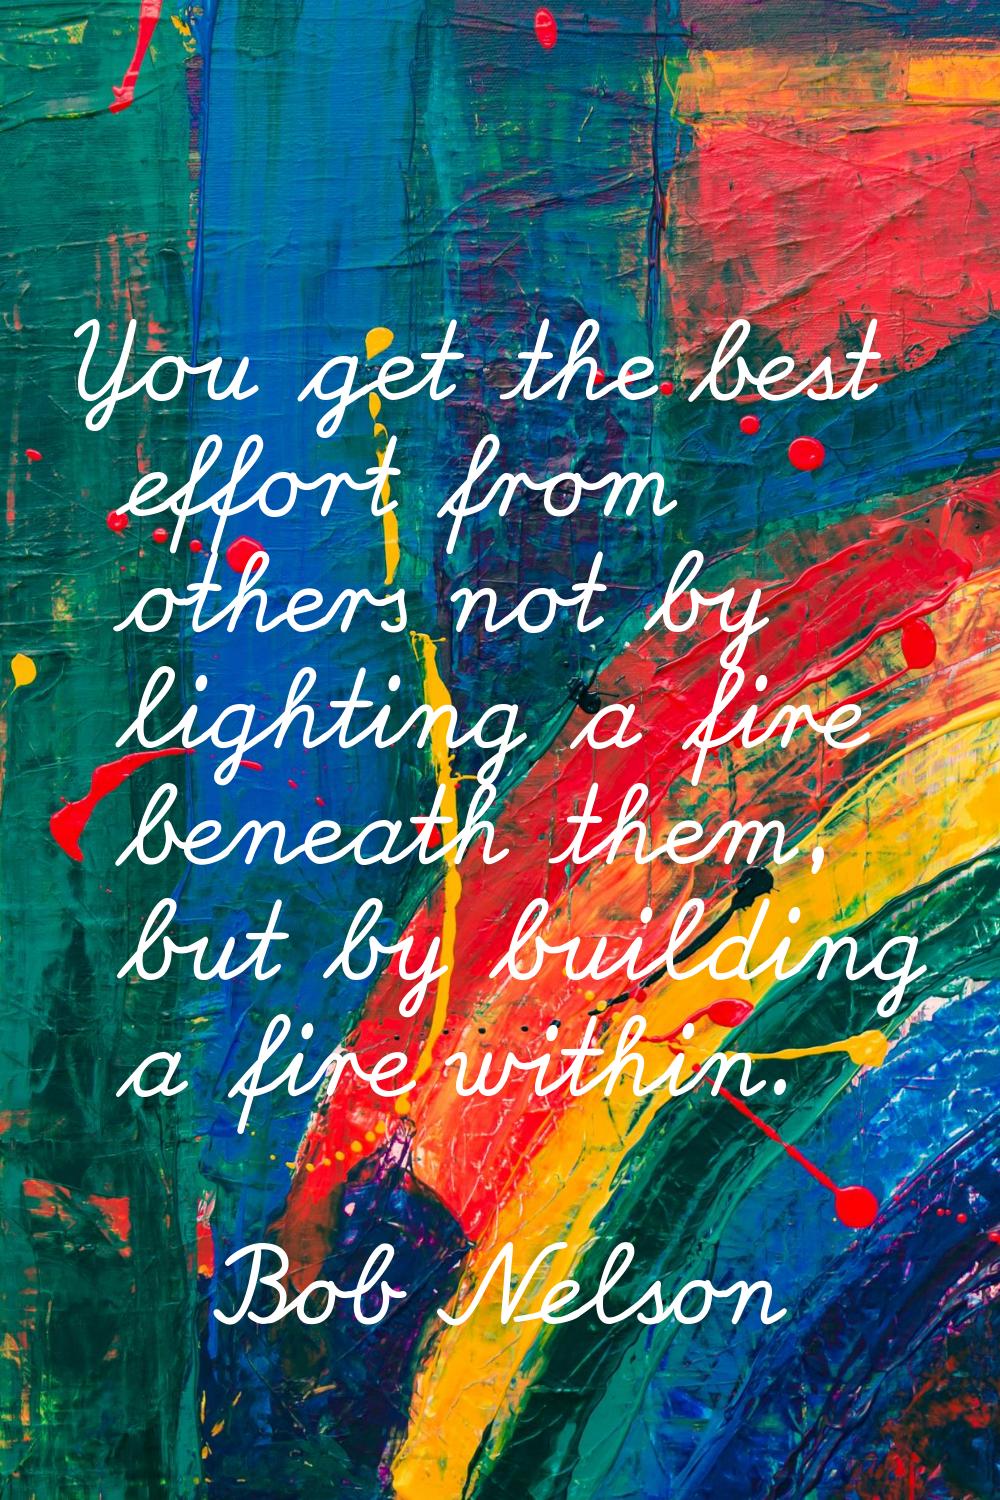 You get the best effort from others not by lighting a fire beneath them, but by building a fire wit